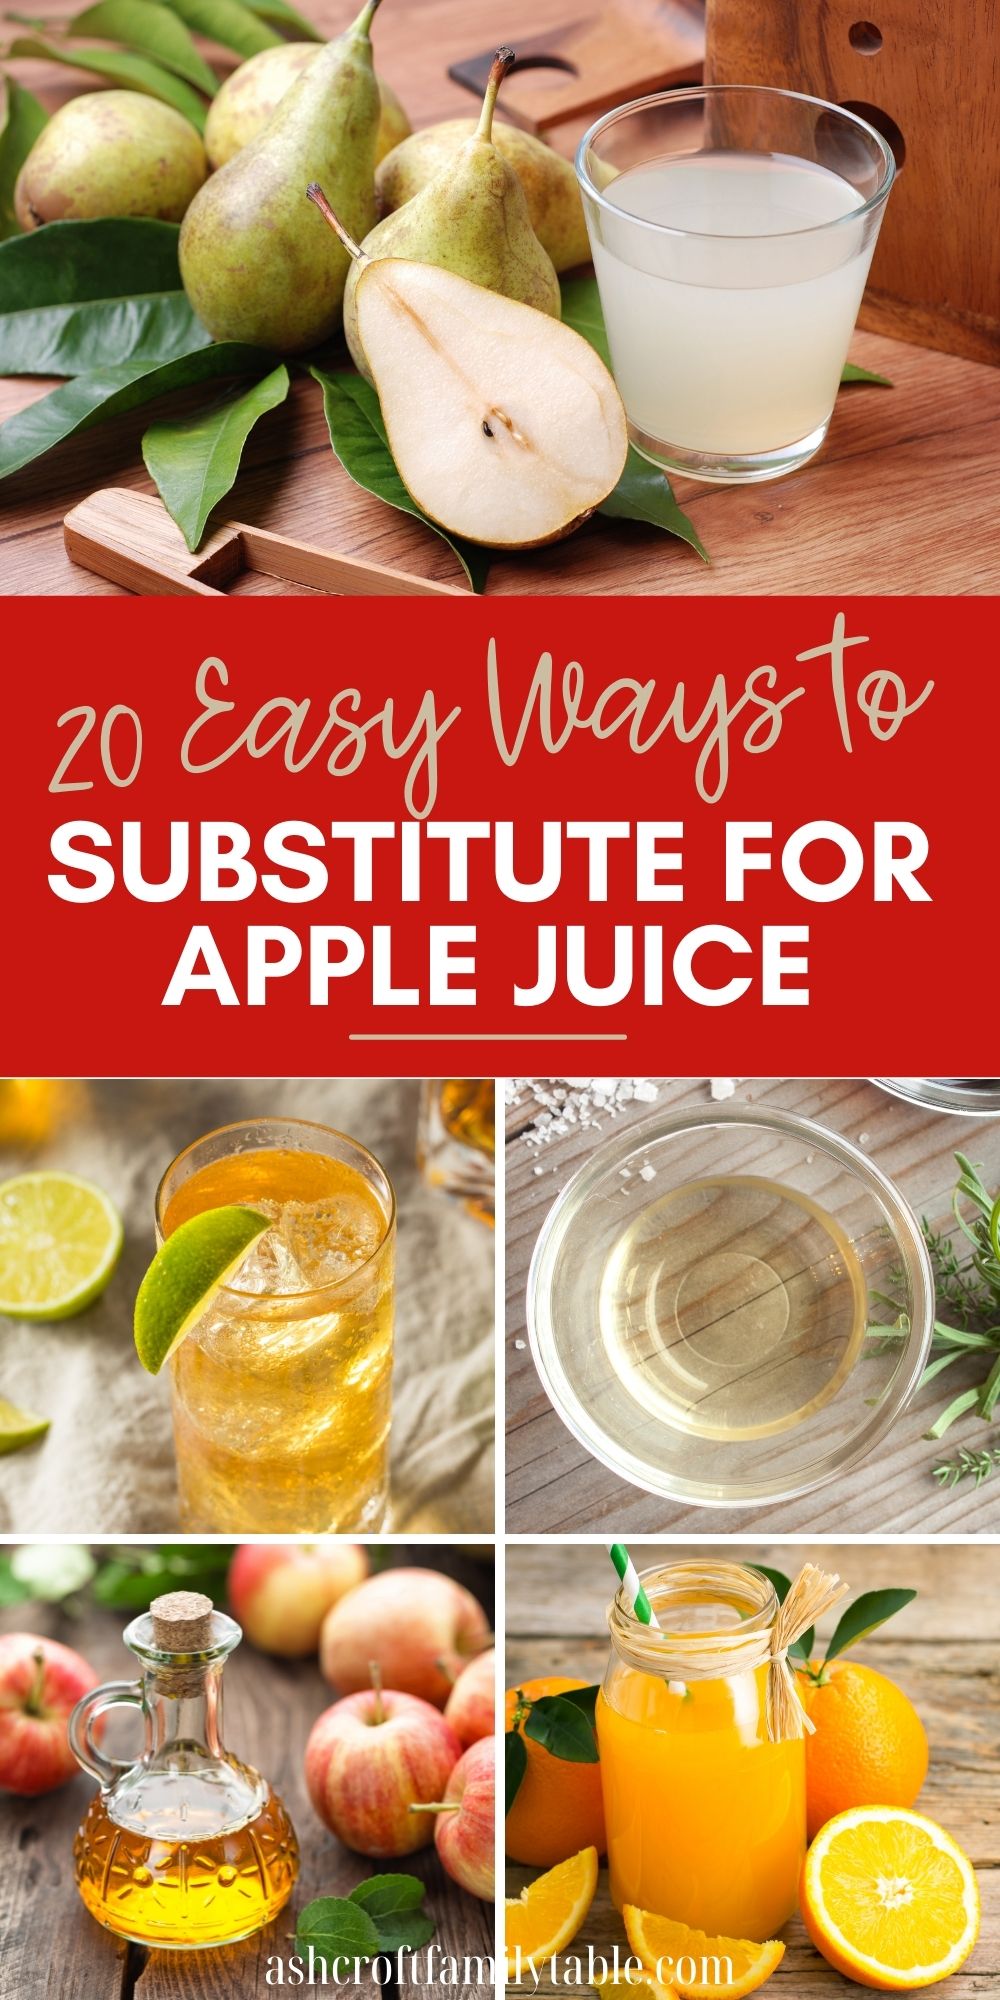 Pinterest graphic with text and collage of ingredients used to substitute for apple juice.